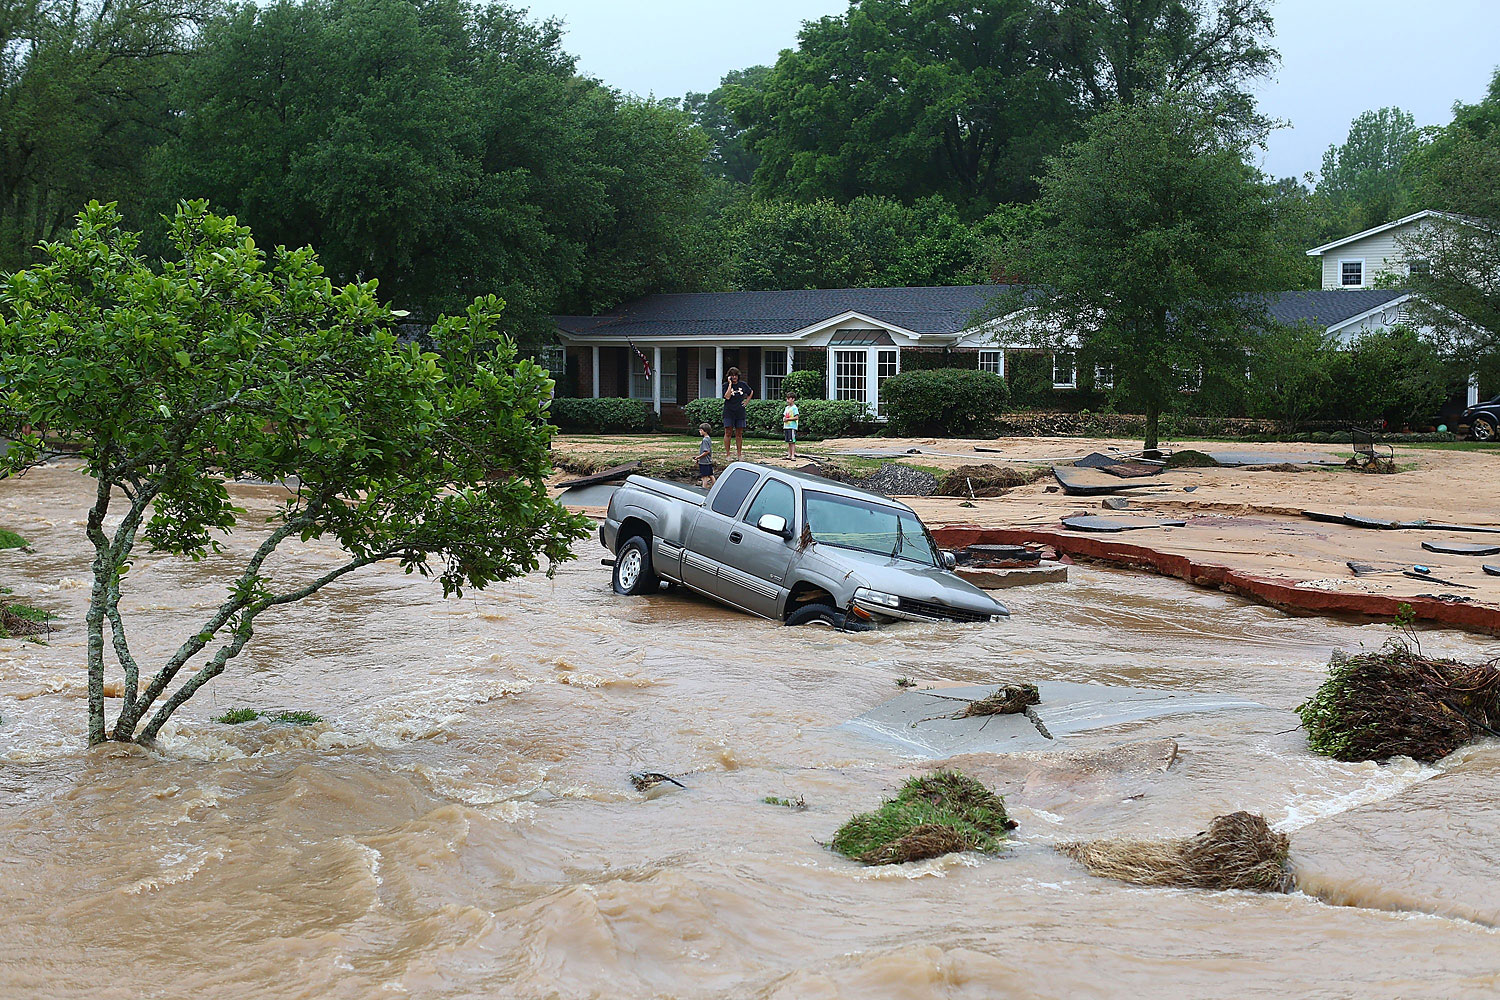 A truck is stuck in the middle of flooded Piedmont Street in the Cordova Park neighborhood after it washed out due to heavy rains on April 30, 2014 in Pensacola, Fla. (Marianna Massey—Getty Images)